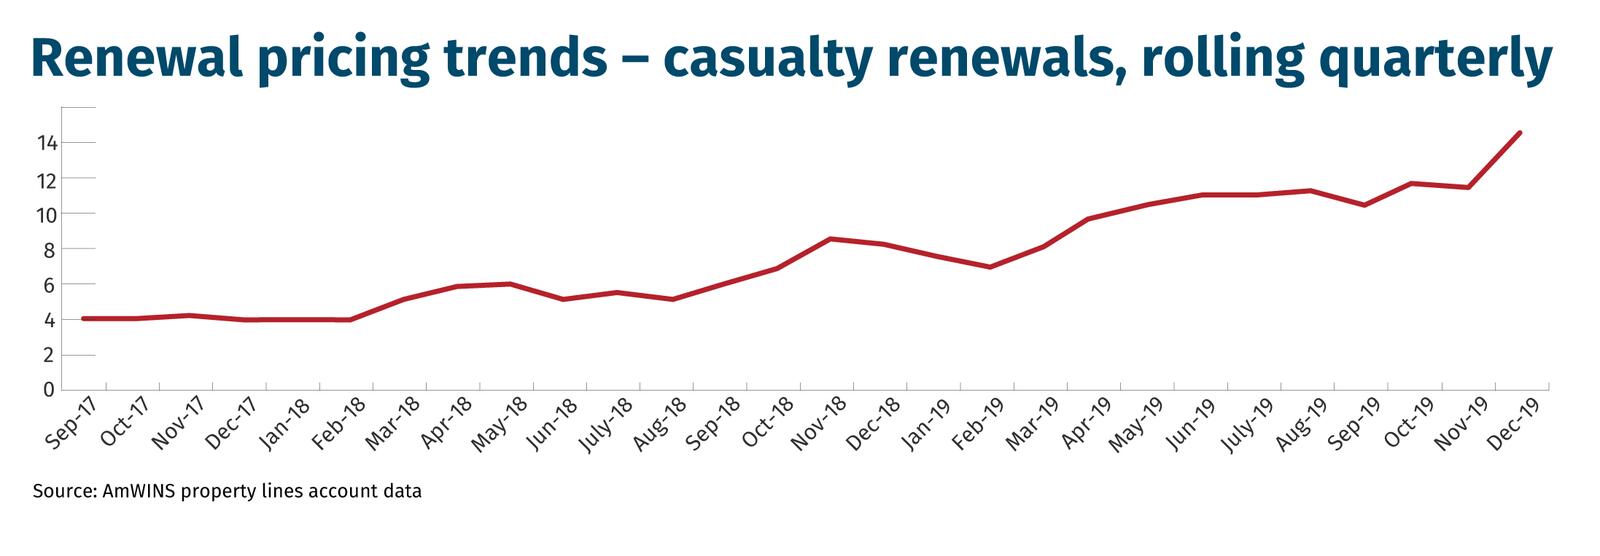 Renewal pricing trends – casualty renewals, rolling quarterly